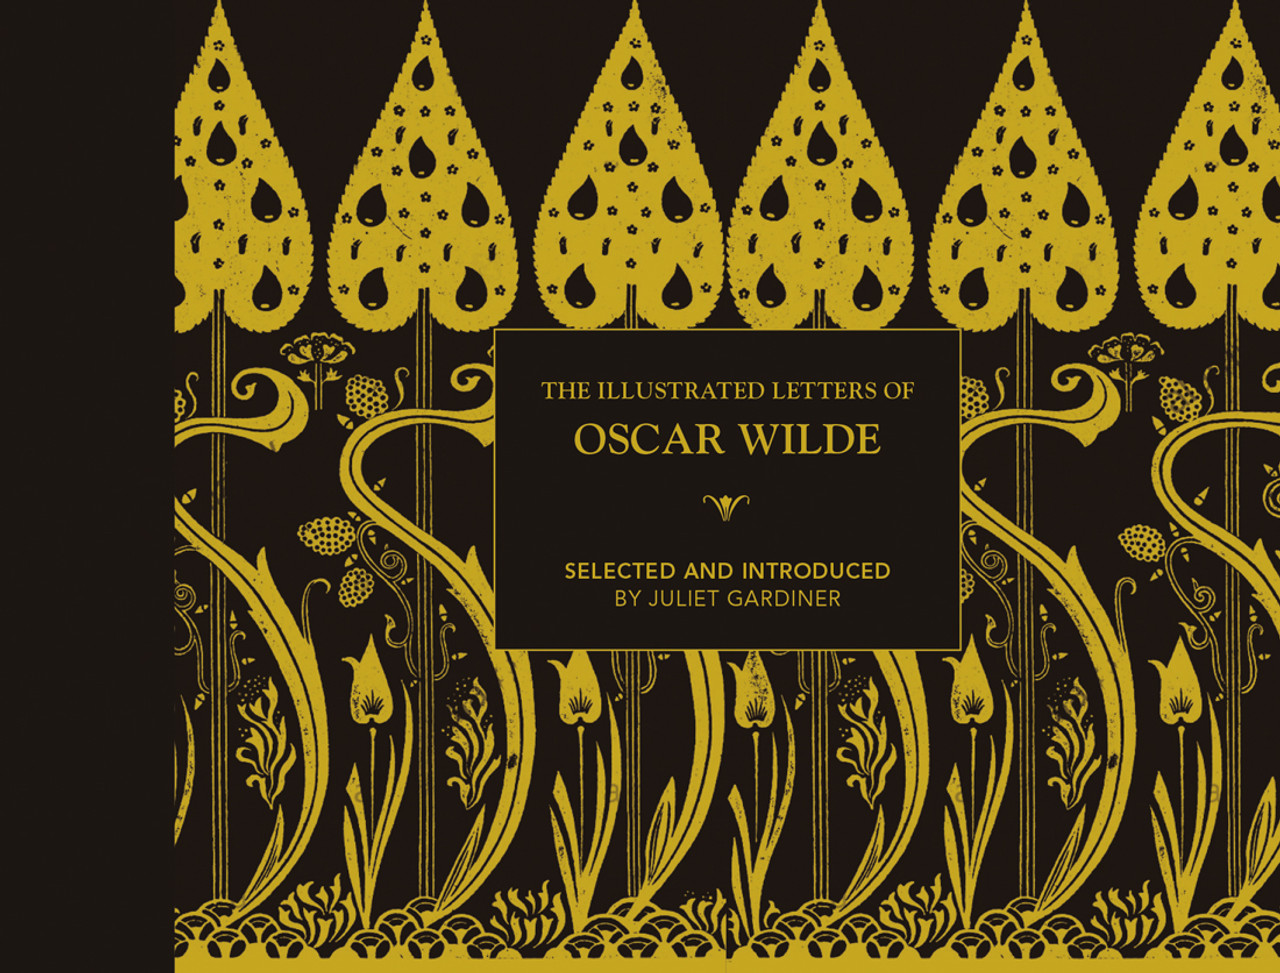 Juliet Gardiner / The Illustrated Letters of Oscar Wilde (Coffee Table Book)